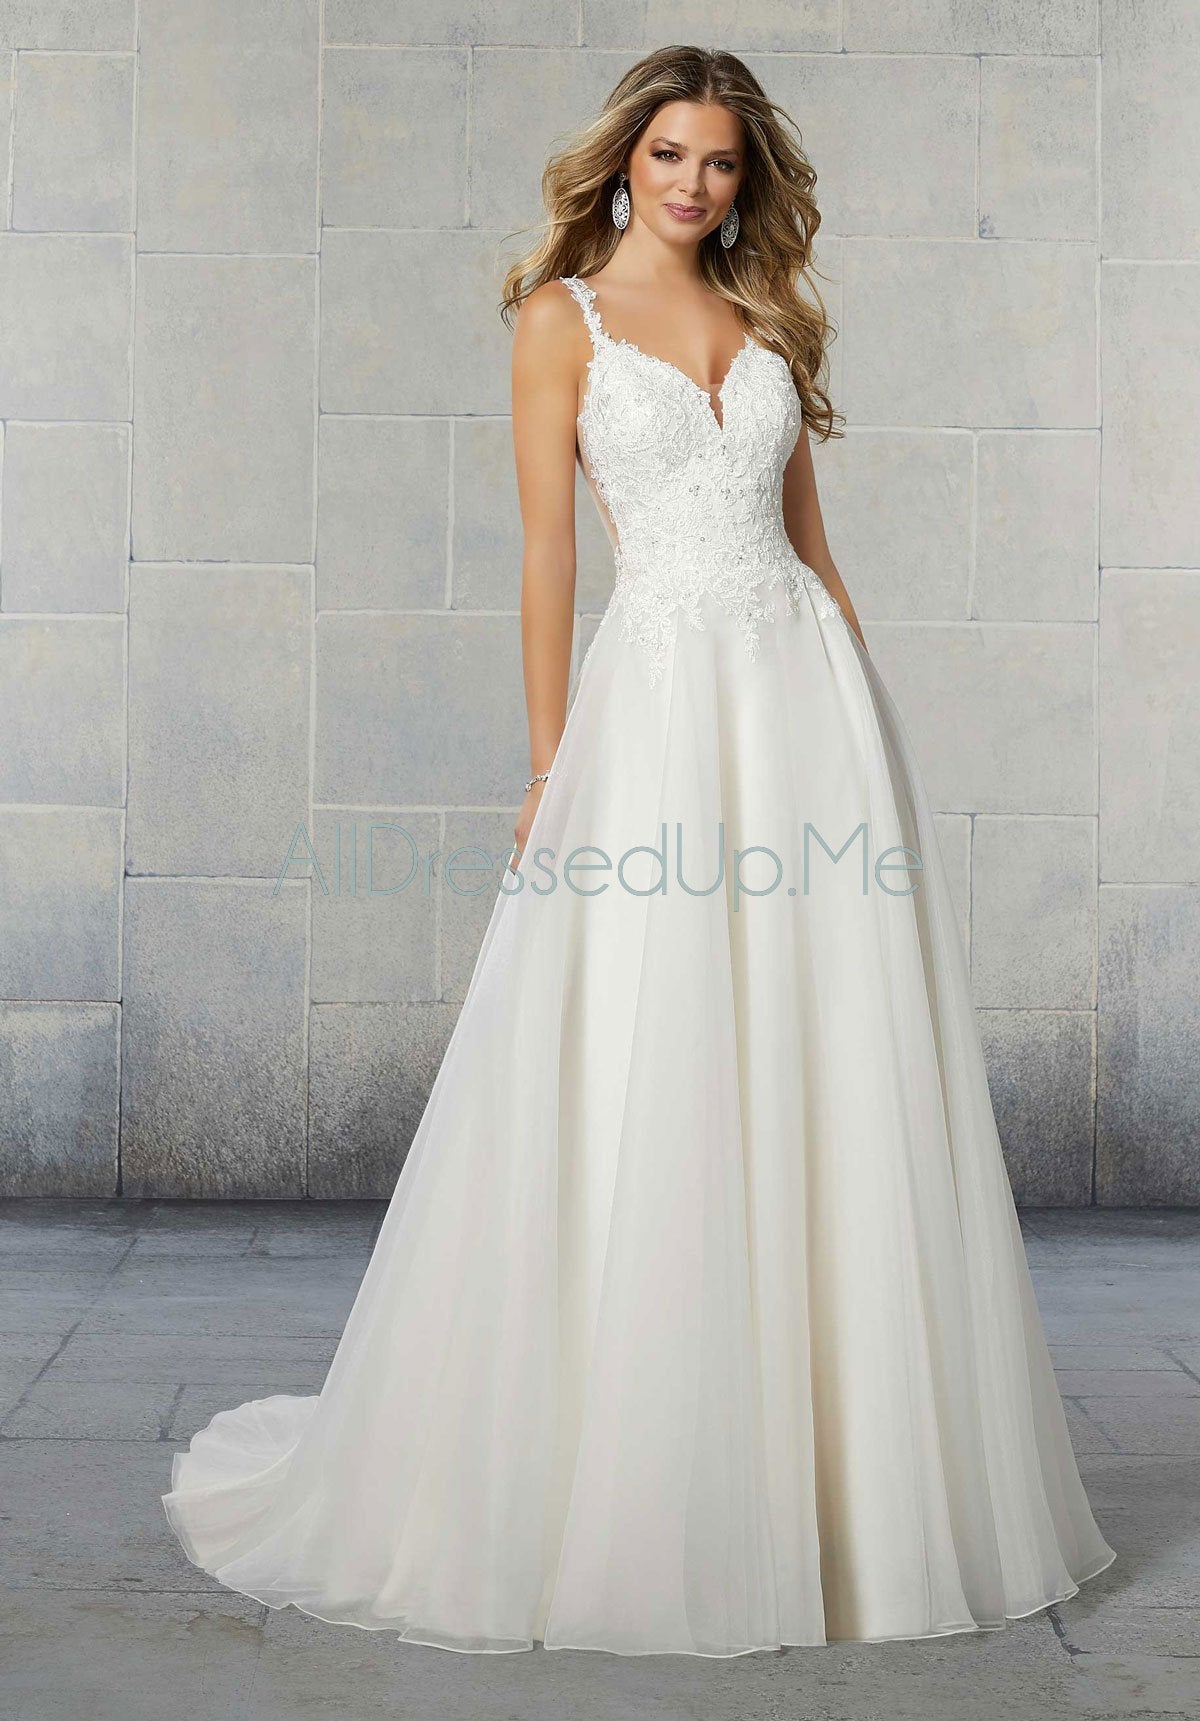 Voyage - Sybil - 6926 - Cheron's Bridal, Wedding Gown - Morilee Voyage - - Wedding Gowns Dresses Chattanooga Hixson Shops Boutiques Tennessee TN Georgia GA MSRP Lowest Prices Sale Discount